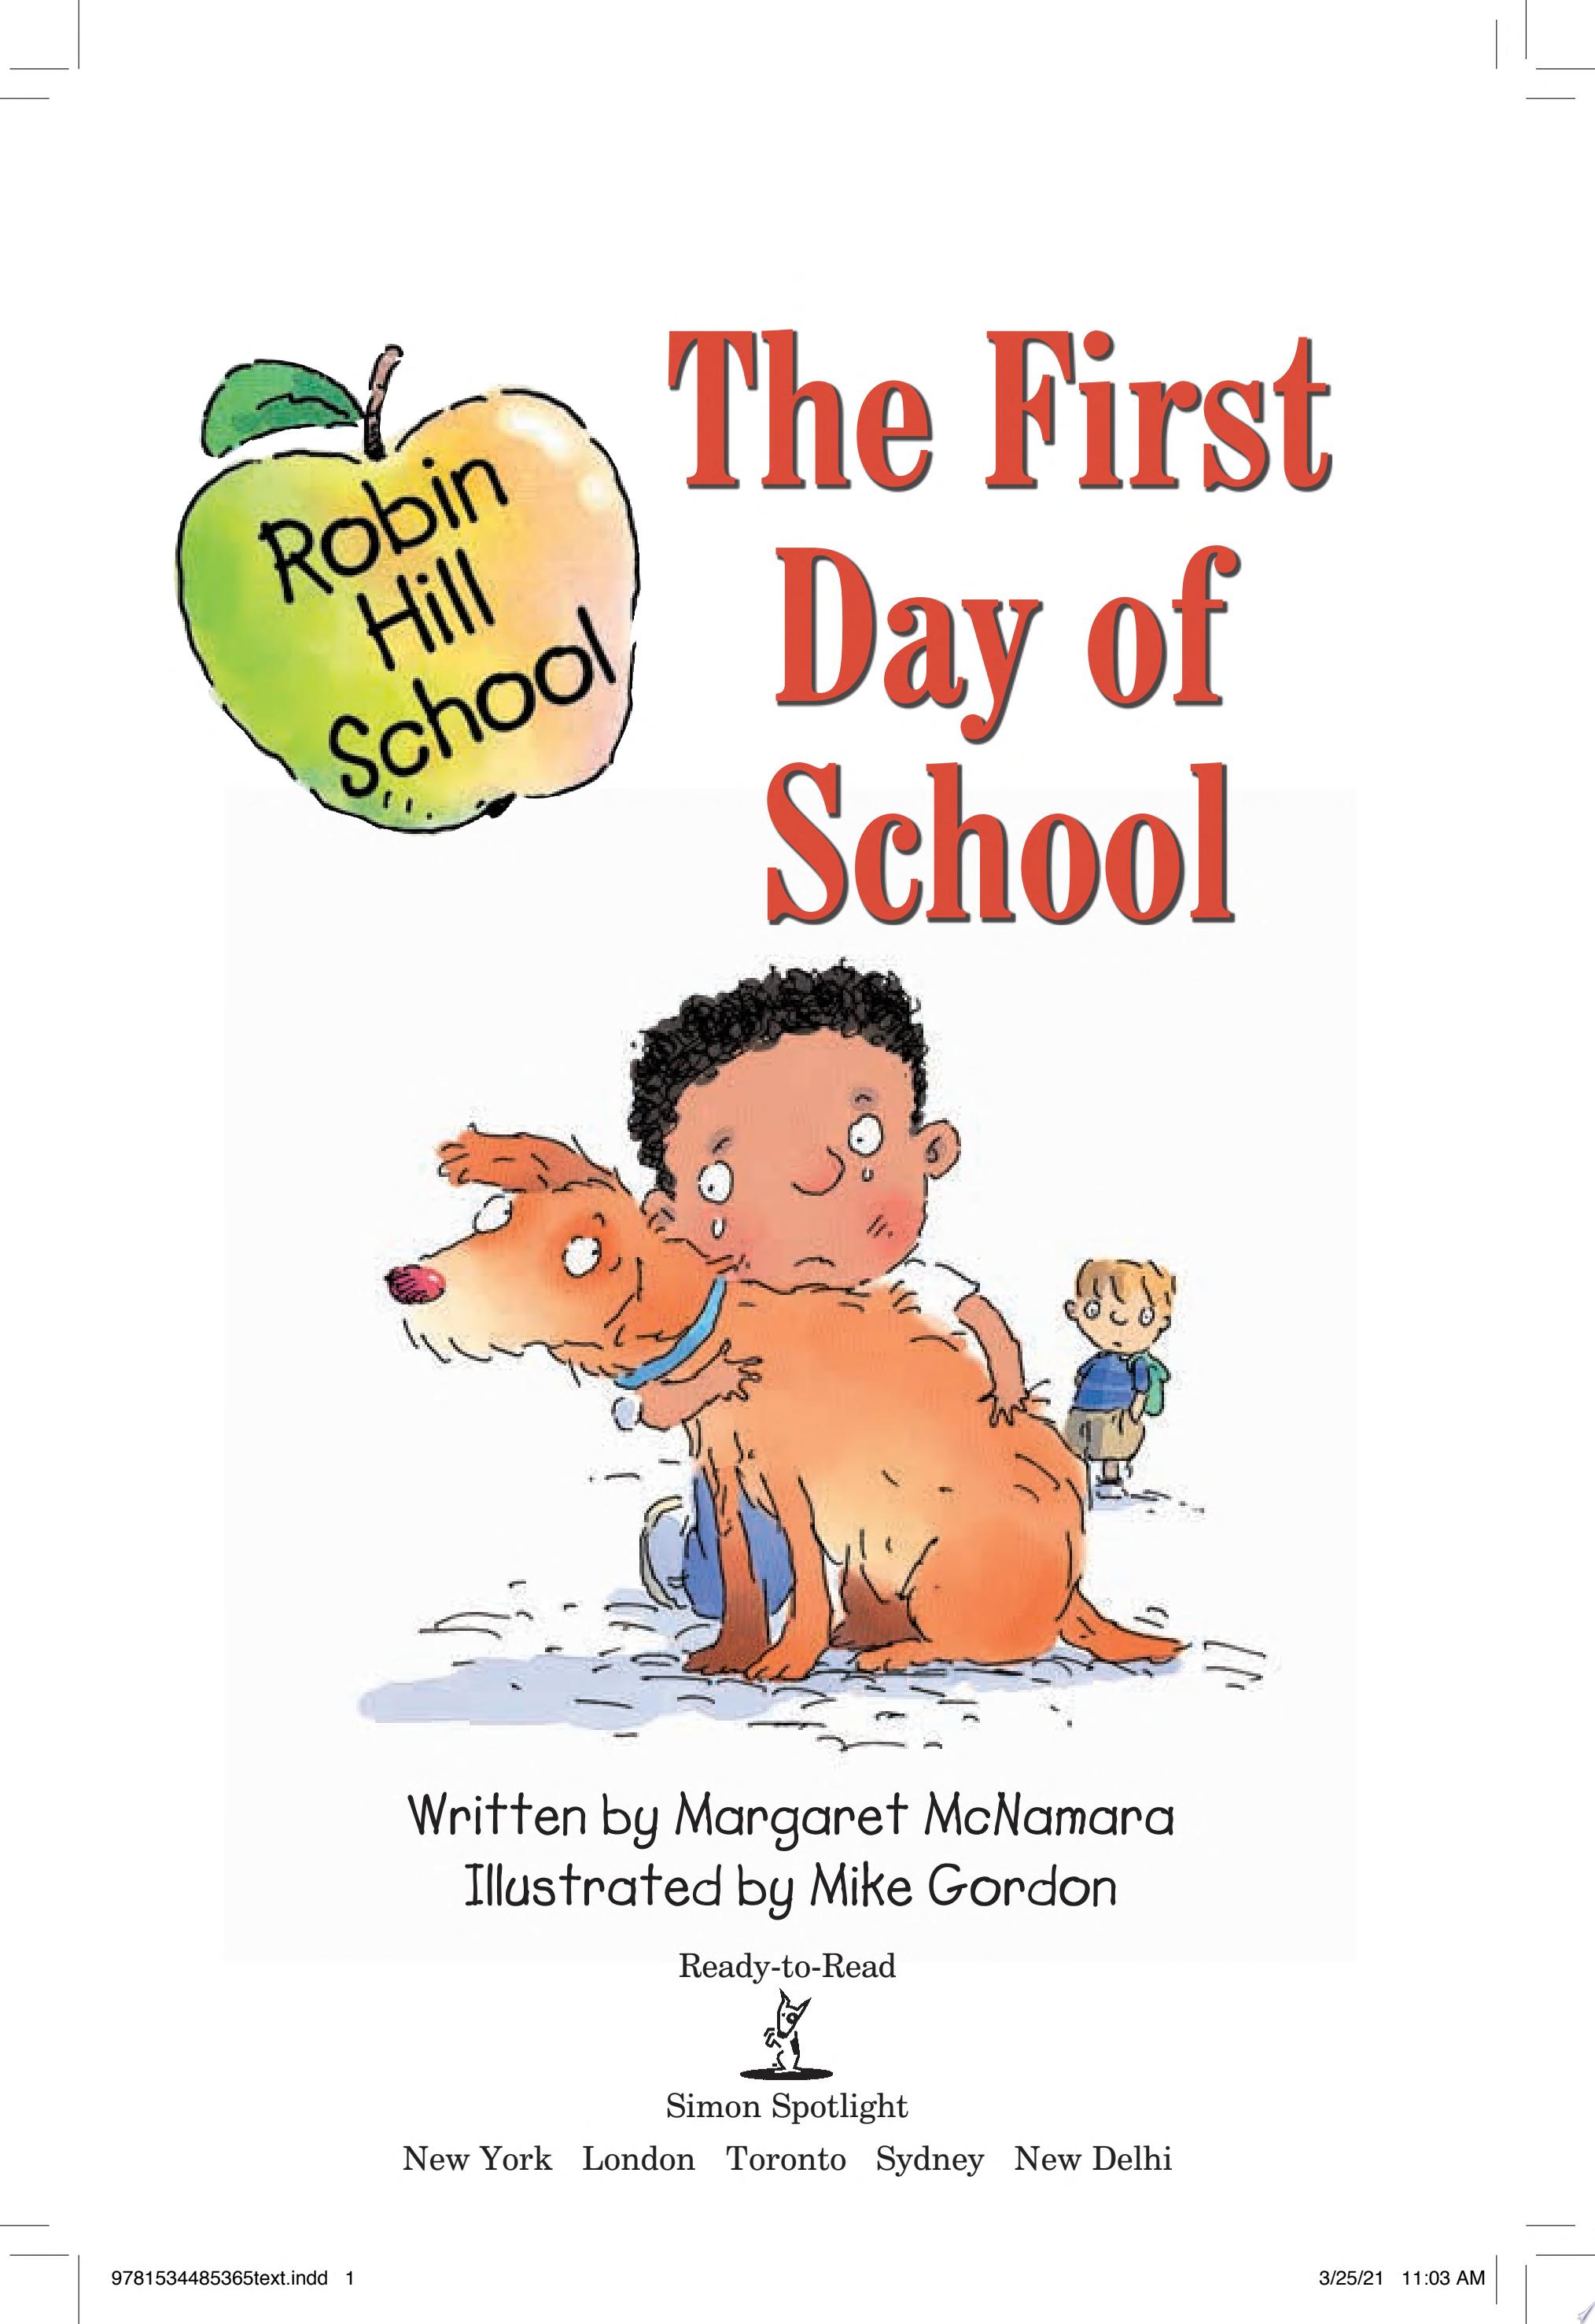 Image for "The First Day of School"